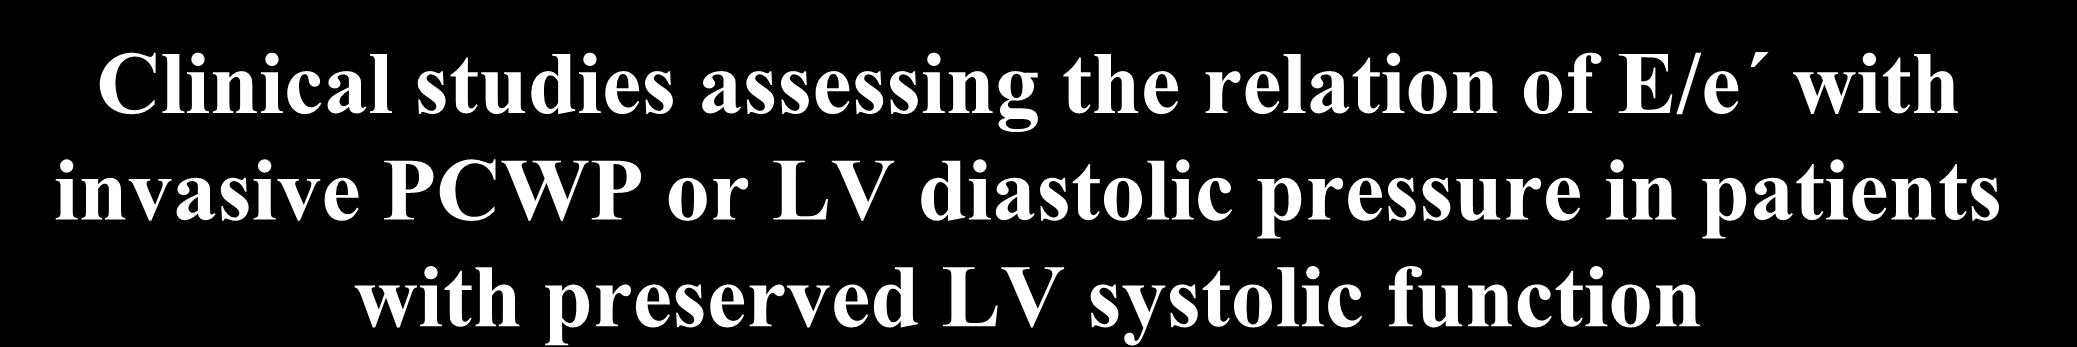 Clinical studies assessing the relation of E/e with invasive PCWP or LV diastolic pressure in